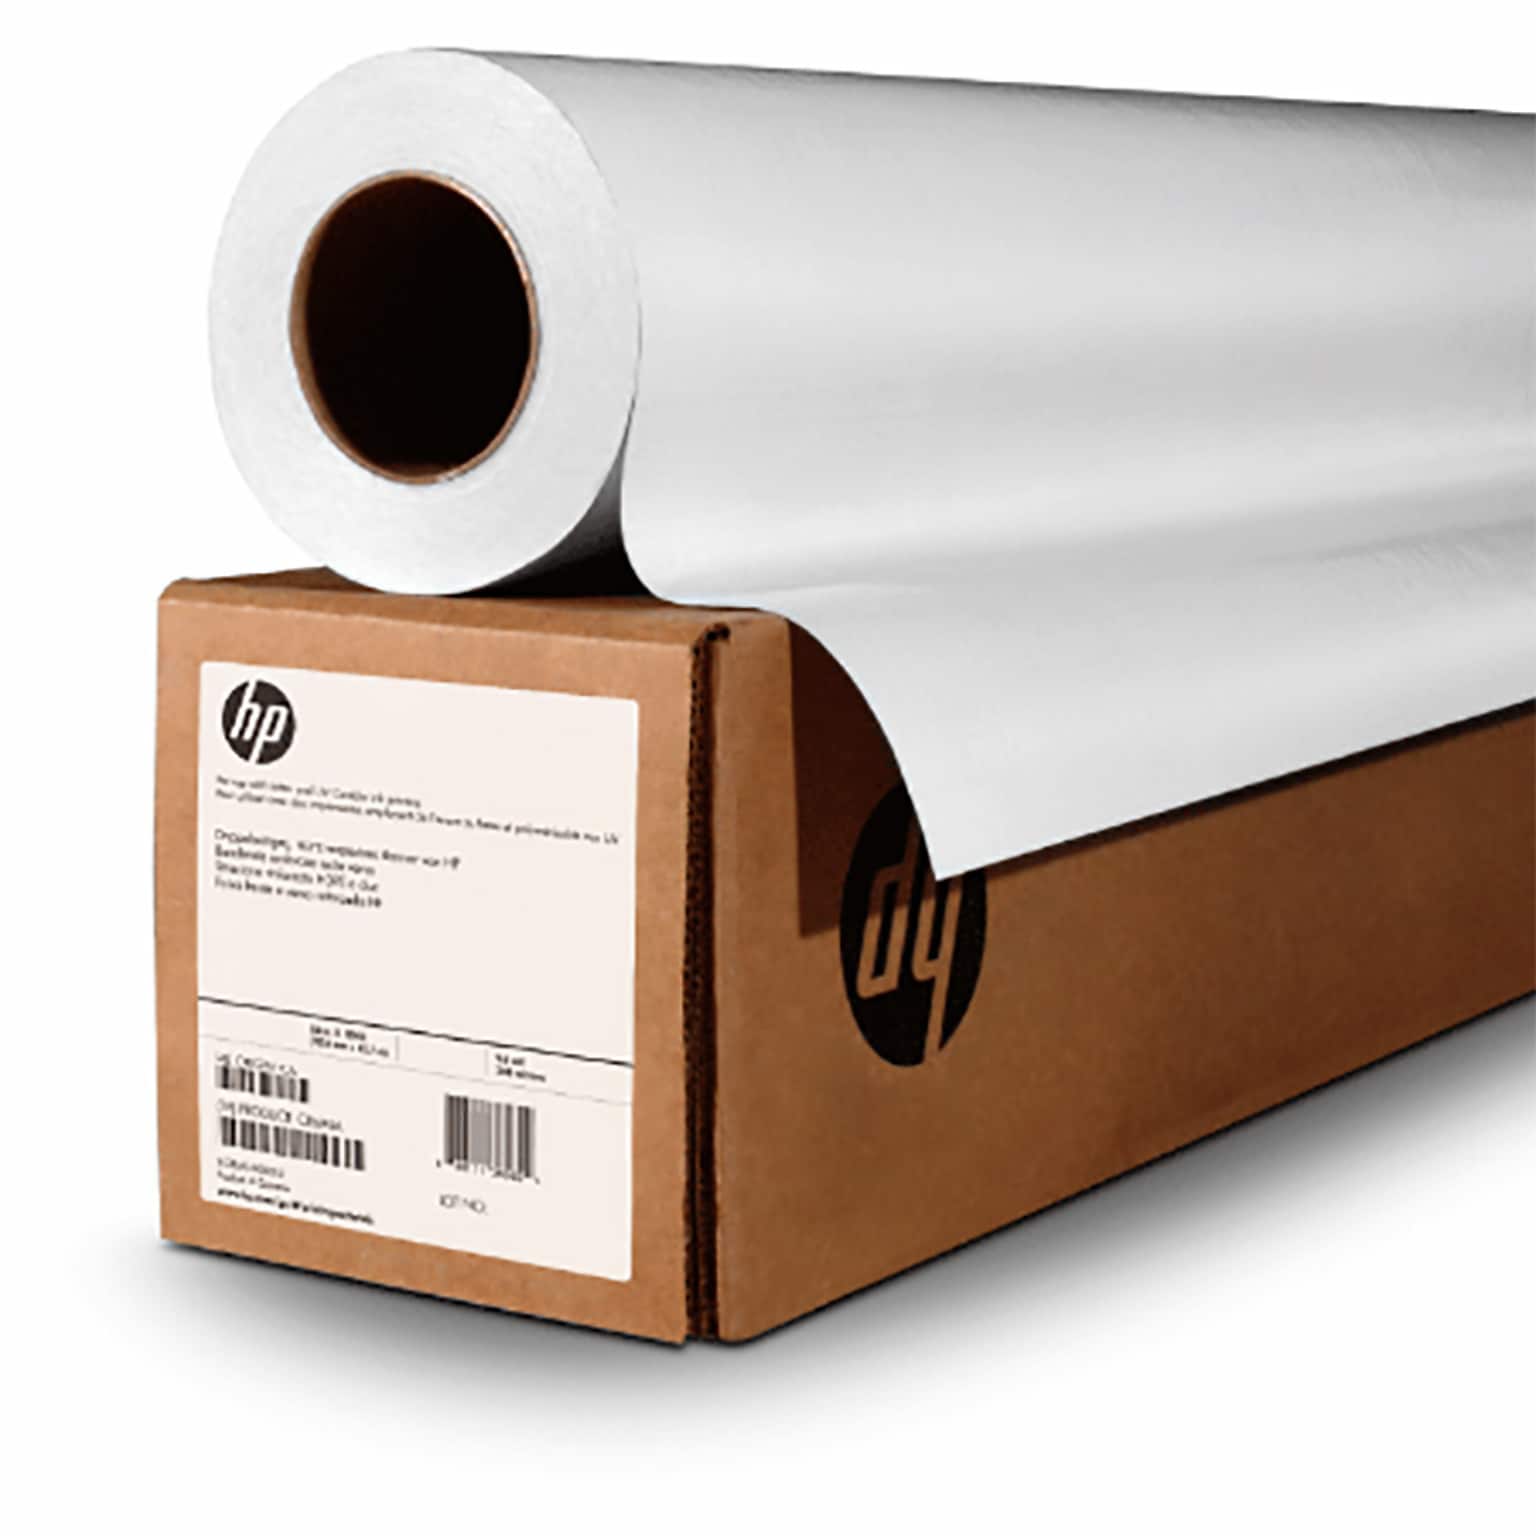 HP Universal Wide Format Removable Adhesive Paper, 42 x 100, Matte Finish (8SU06A)